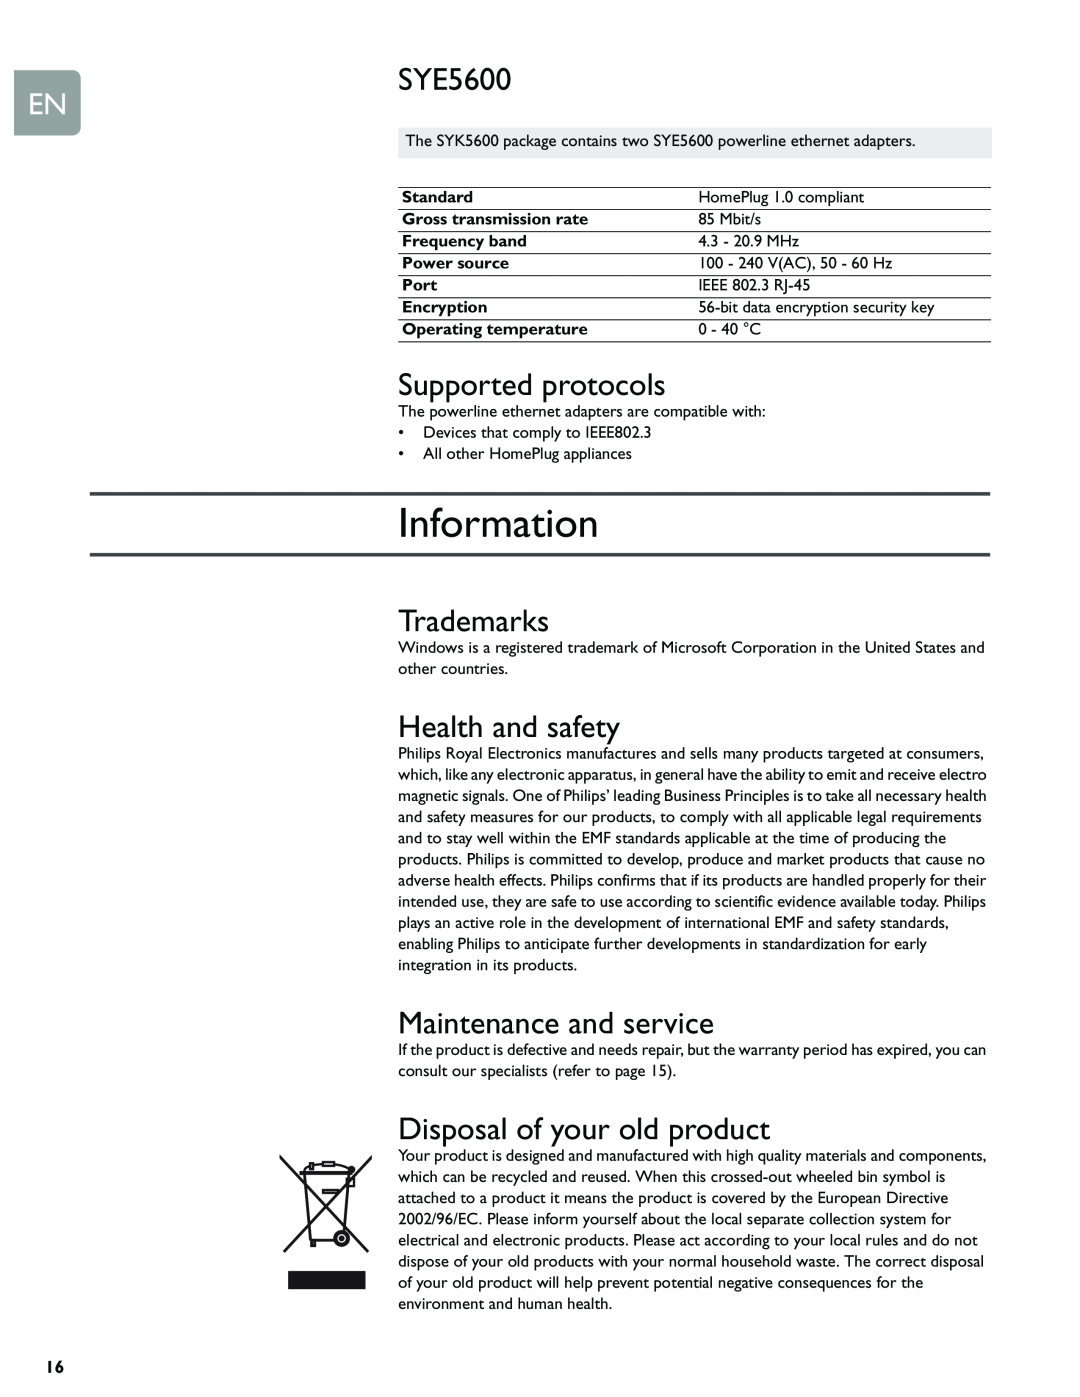 Philips SYE5600 Information, Supported protocols, Trademarks, Health and safety, Maintenance and service, Standard, Port 